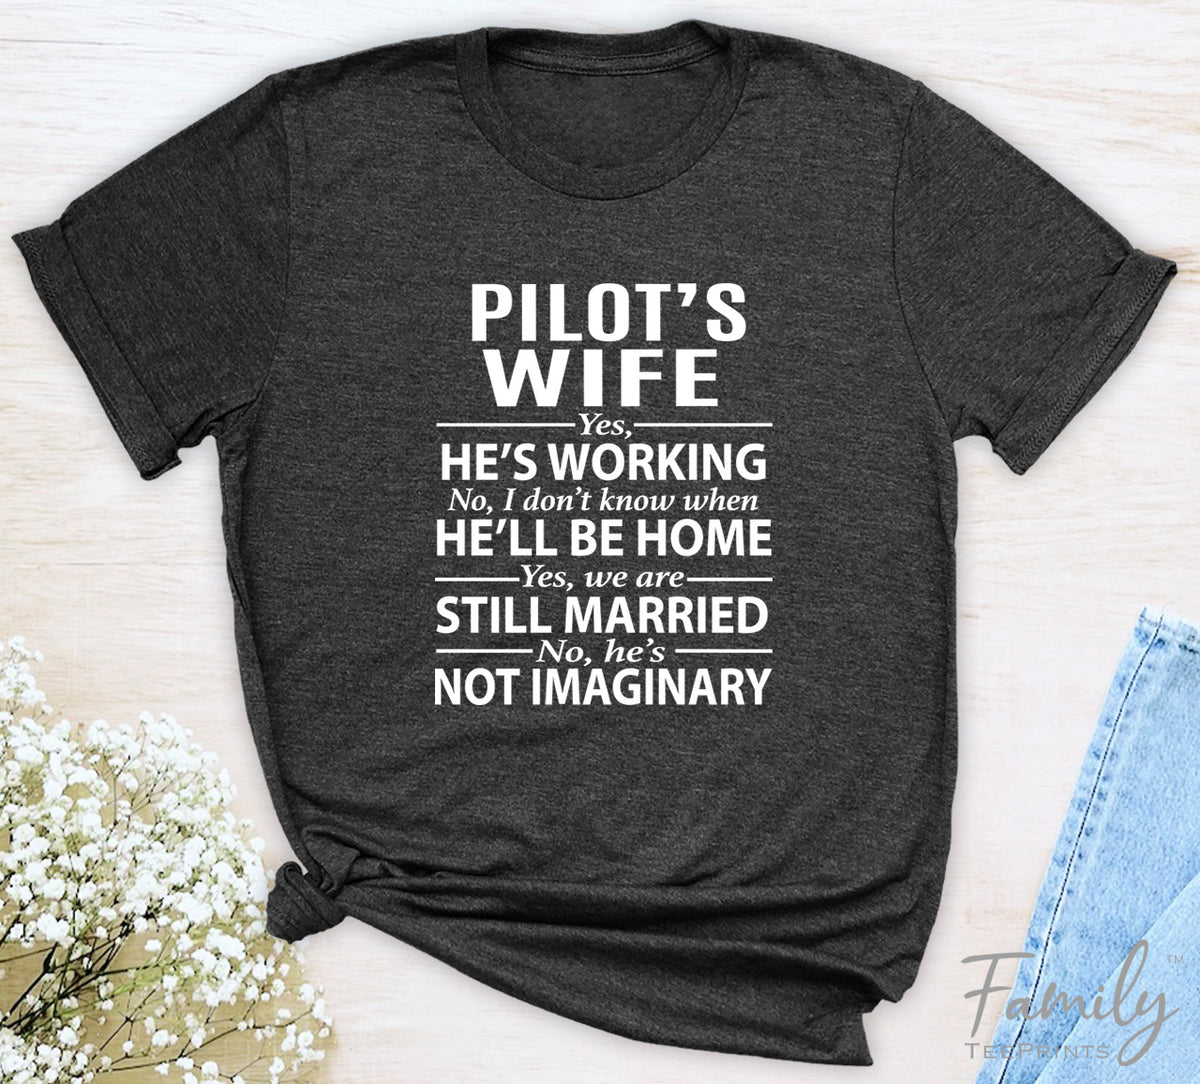 Pilot's Wife Yes, He's Working - Unisex T-shirt - Pilot's Wife Shirt - Gift For Pilot's Wife